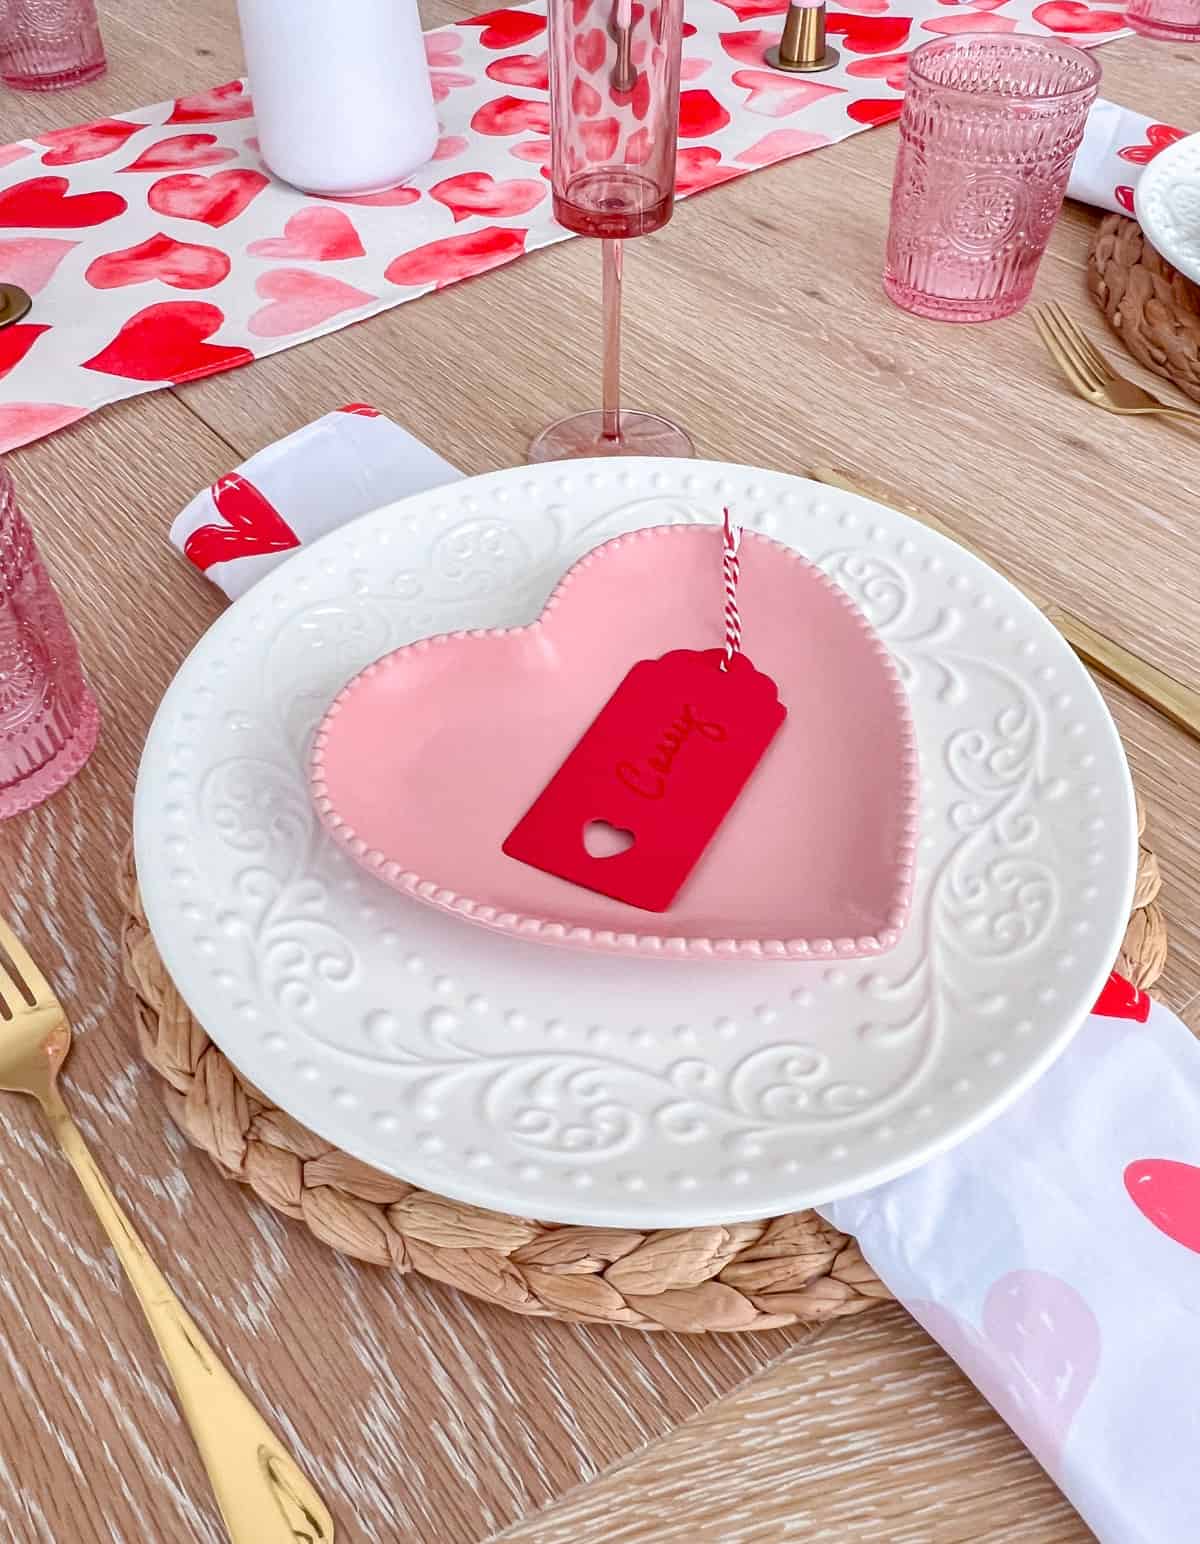 Place setting with pink heart plate and red name tag.